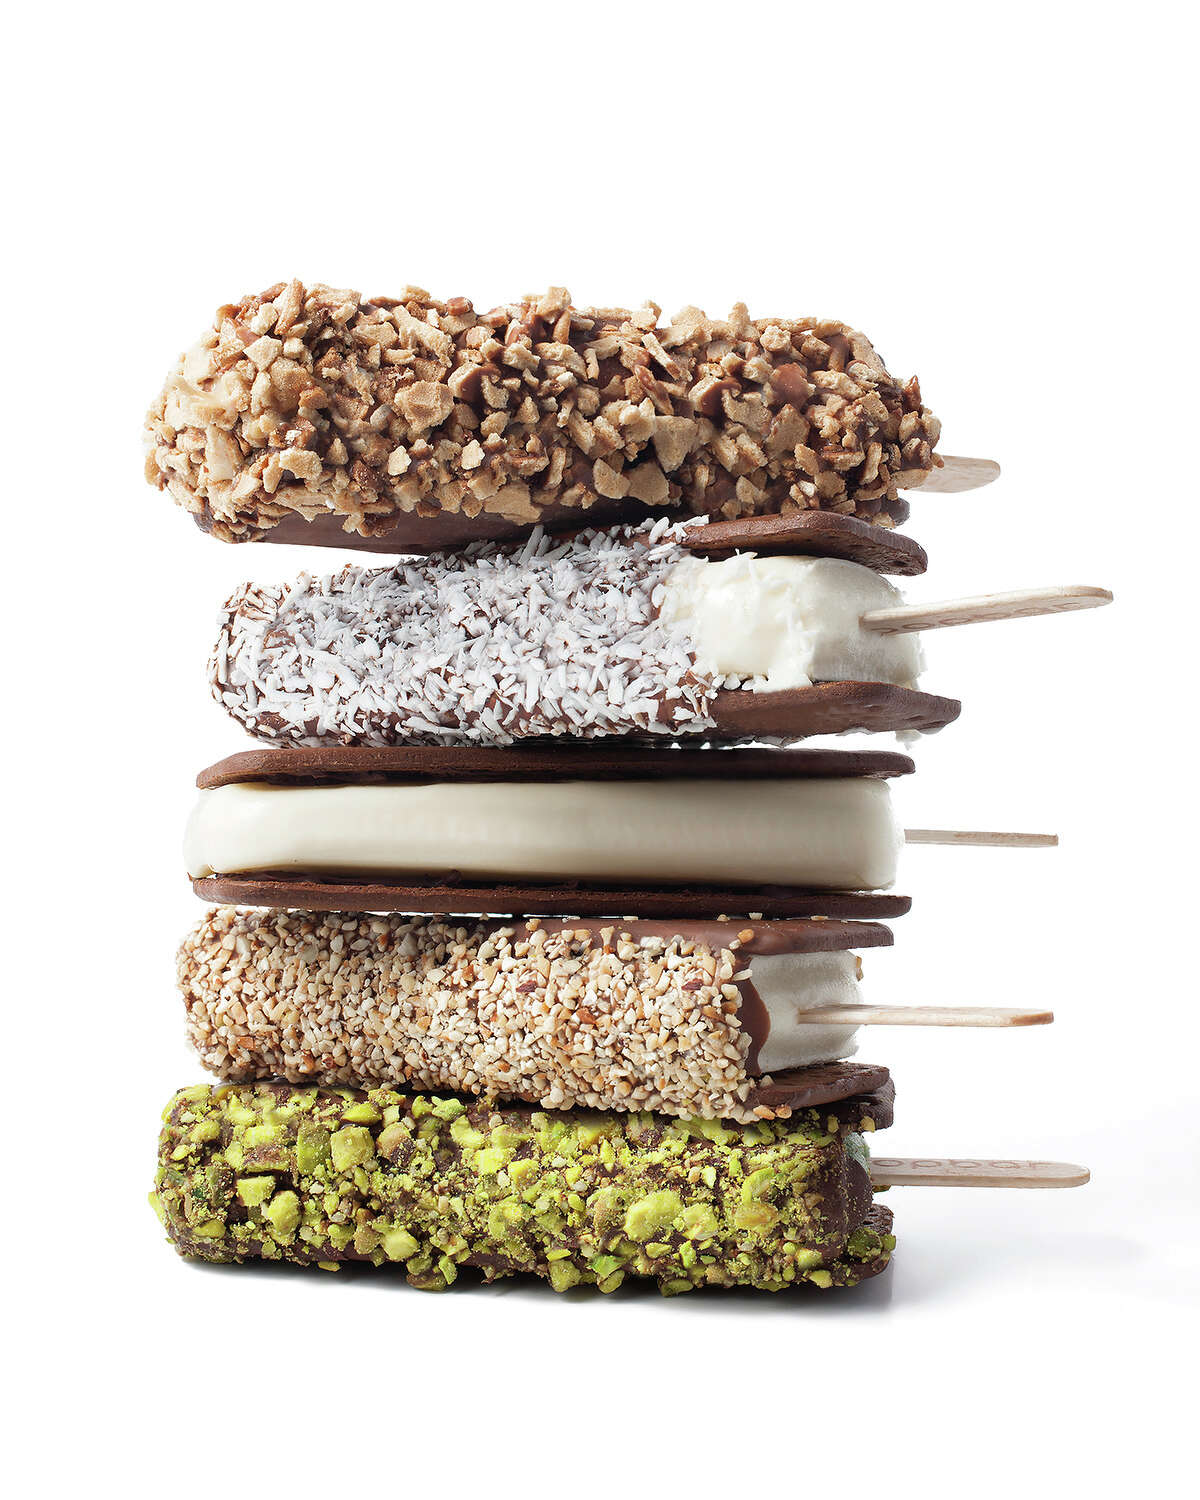 Popbar serves all natural, handcrafted gelato, sorbet and yogurt on a stick.